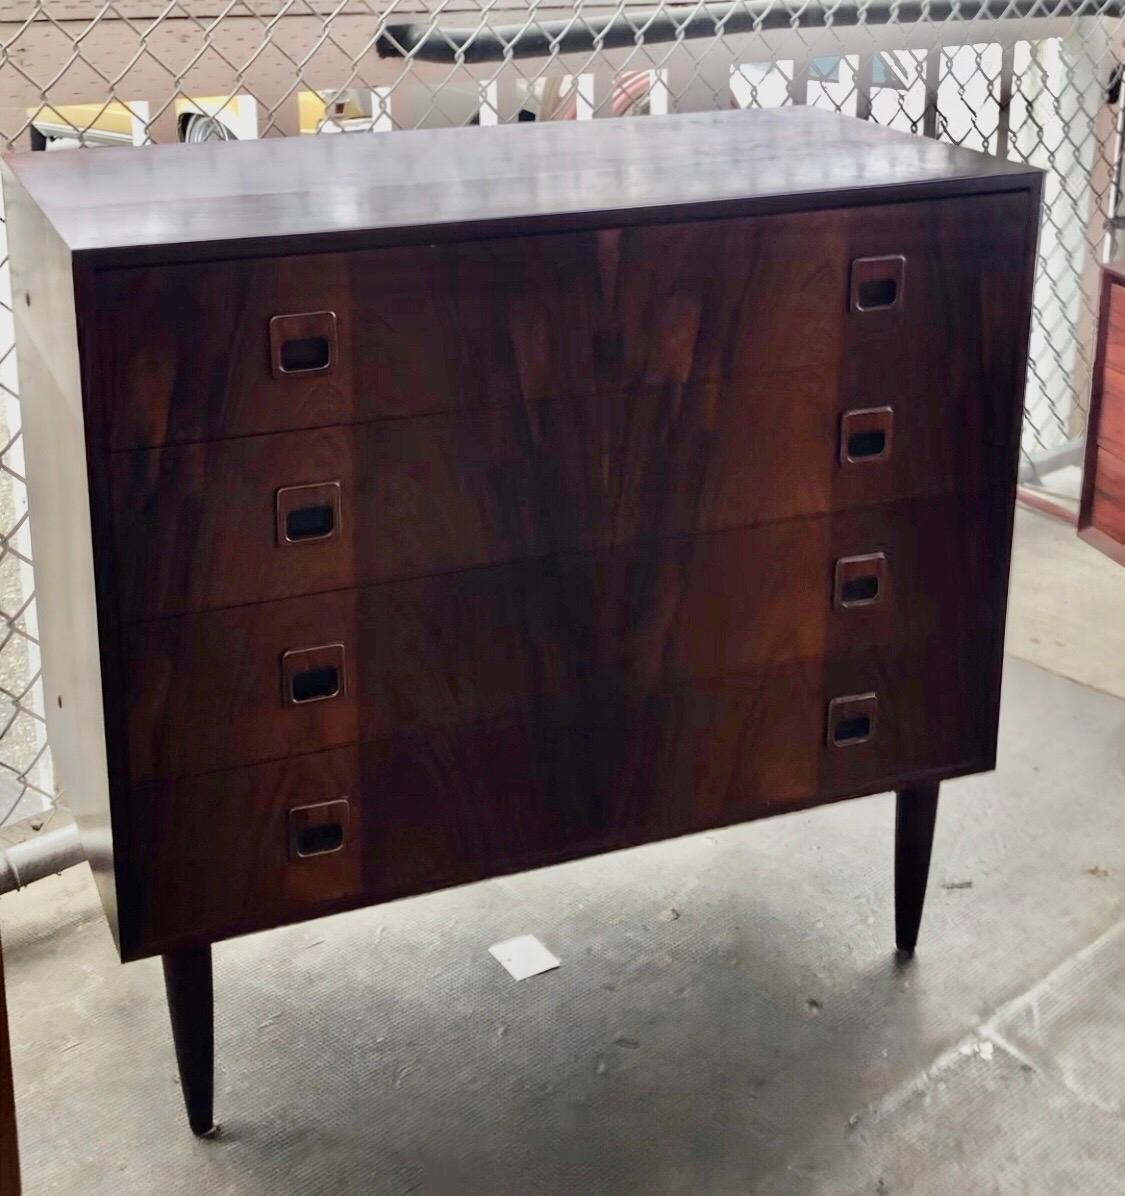 Gorgeous and highly sought after Danish rosewood dresser. Made in Denmark. Designer unknown.

Four drawers. Amazing grain pattern.